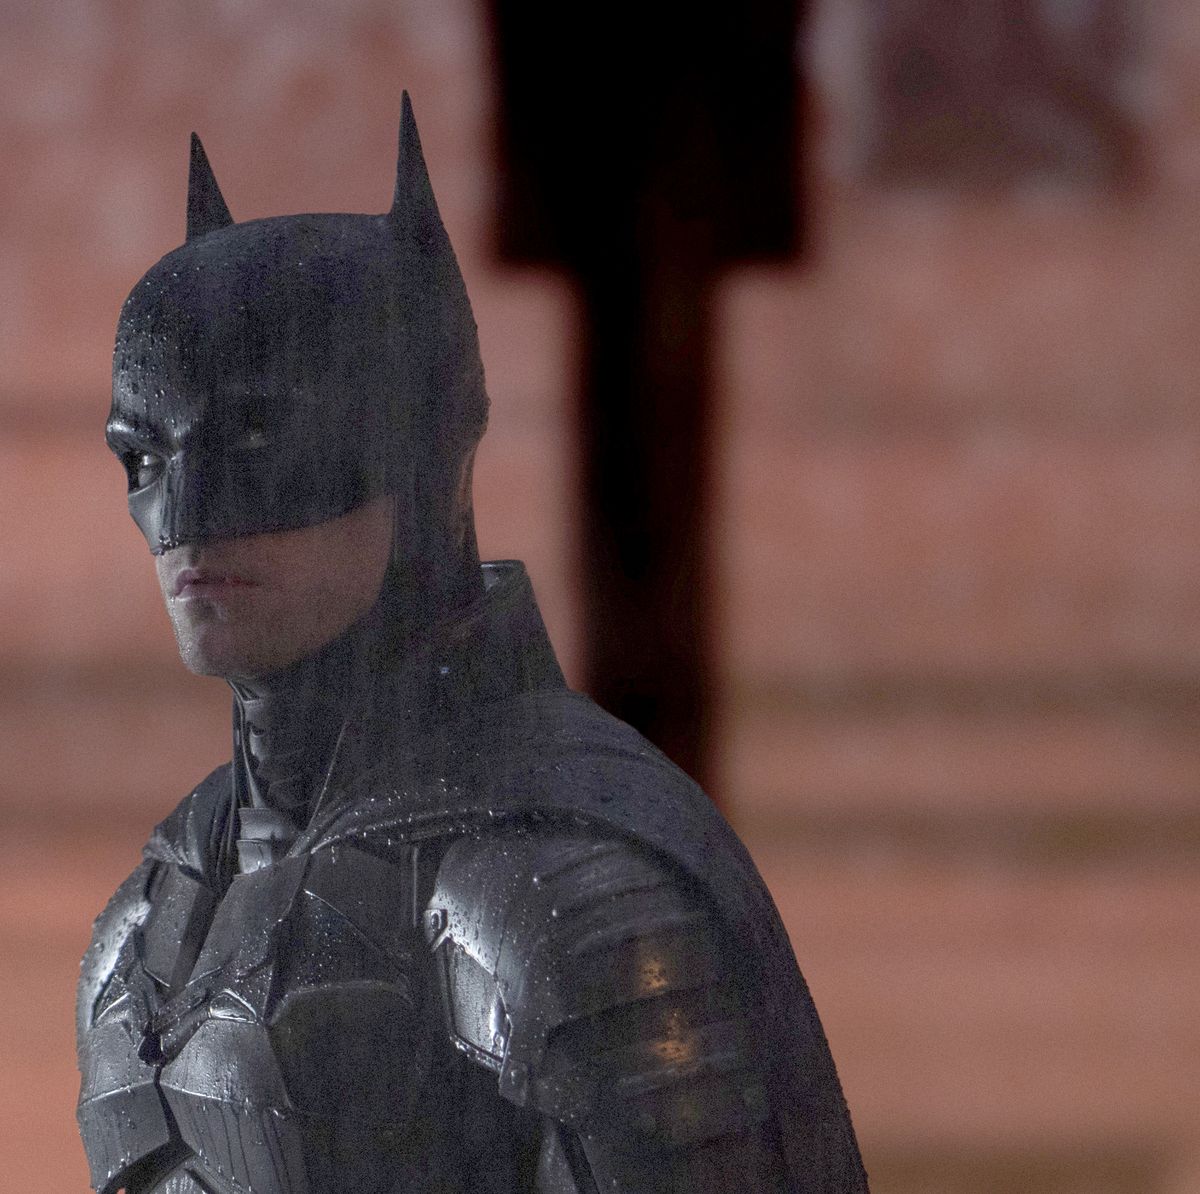 The Batman 2 Cast: Every Character Expected to Appear In Sequel